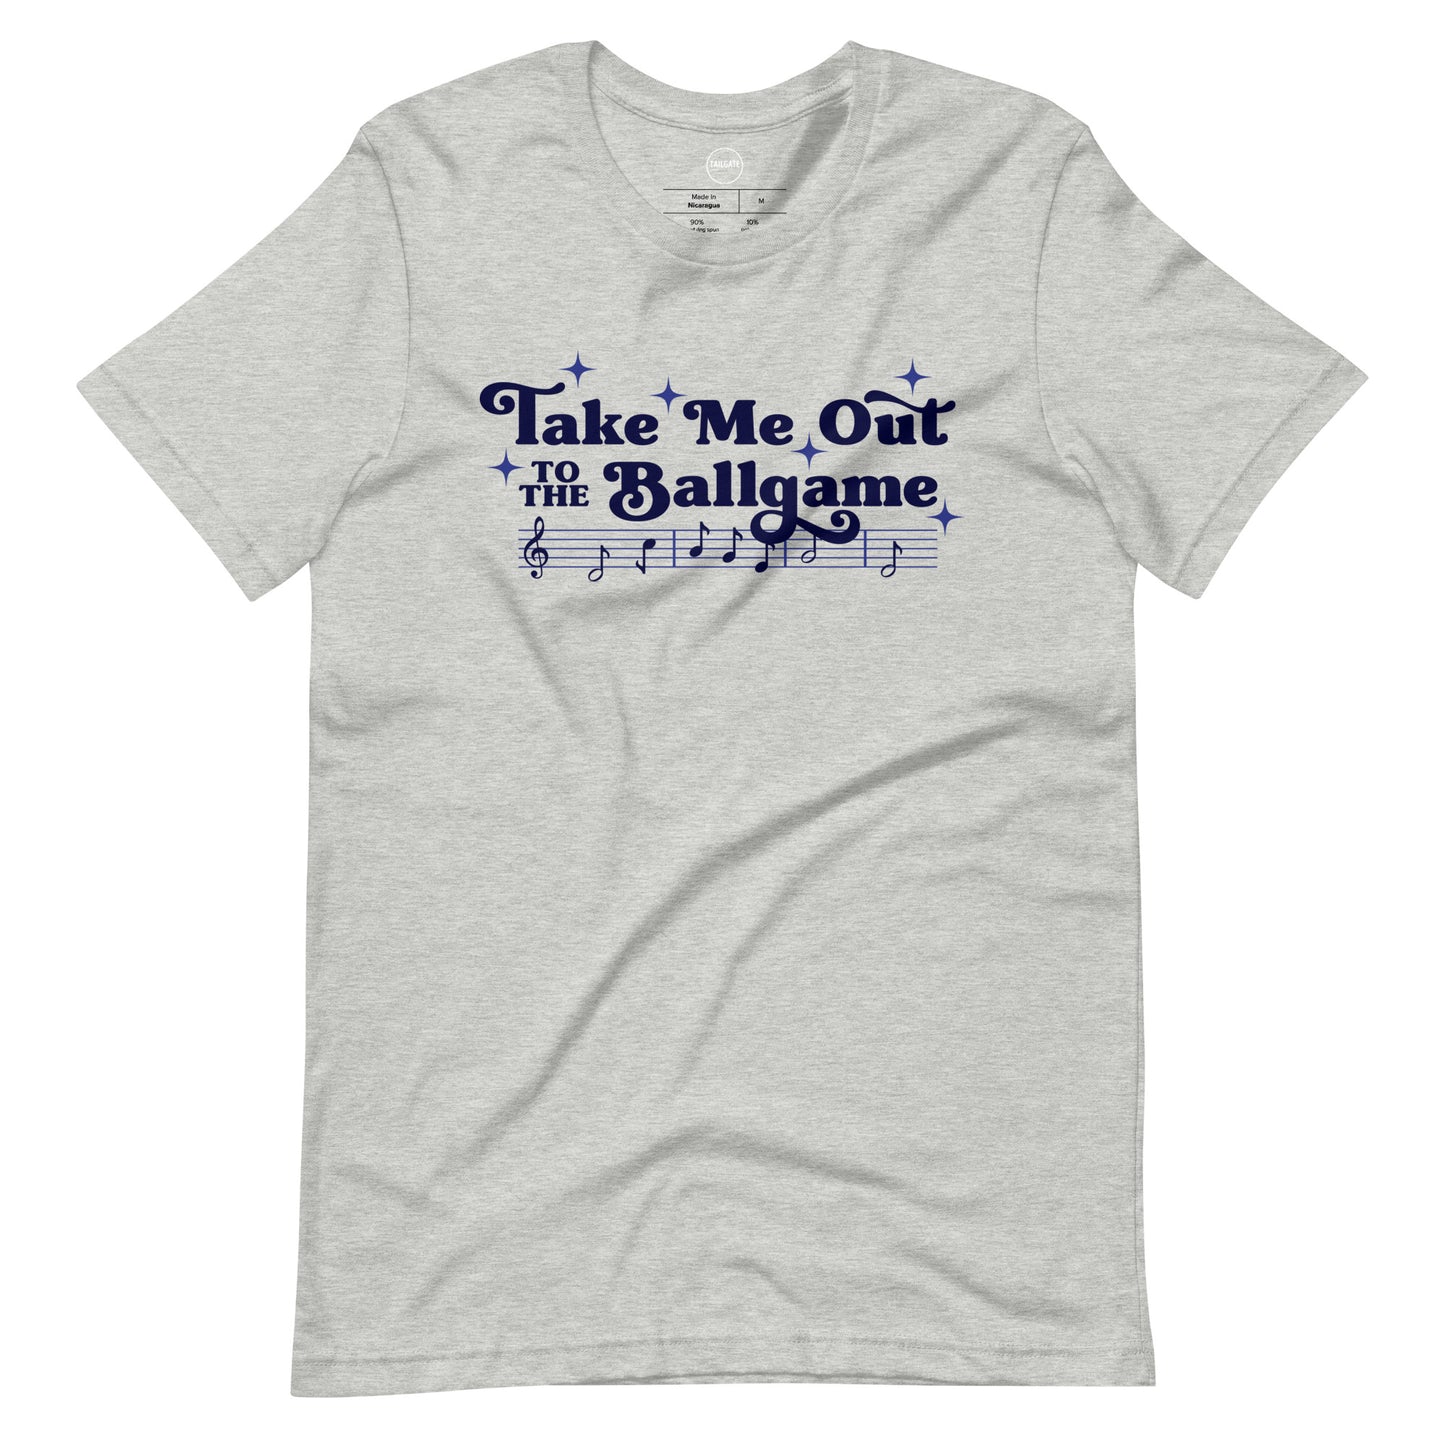 Image of heather athletic grey t-shirt with design of "Take Me Out to the Ballgame" with coordinating musical notes in navy located on centre chest. This design is exclusive to Tailgate Mercantile and available only online.